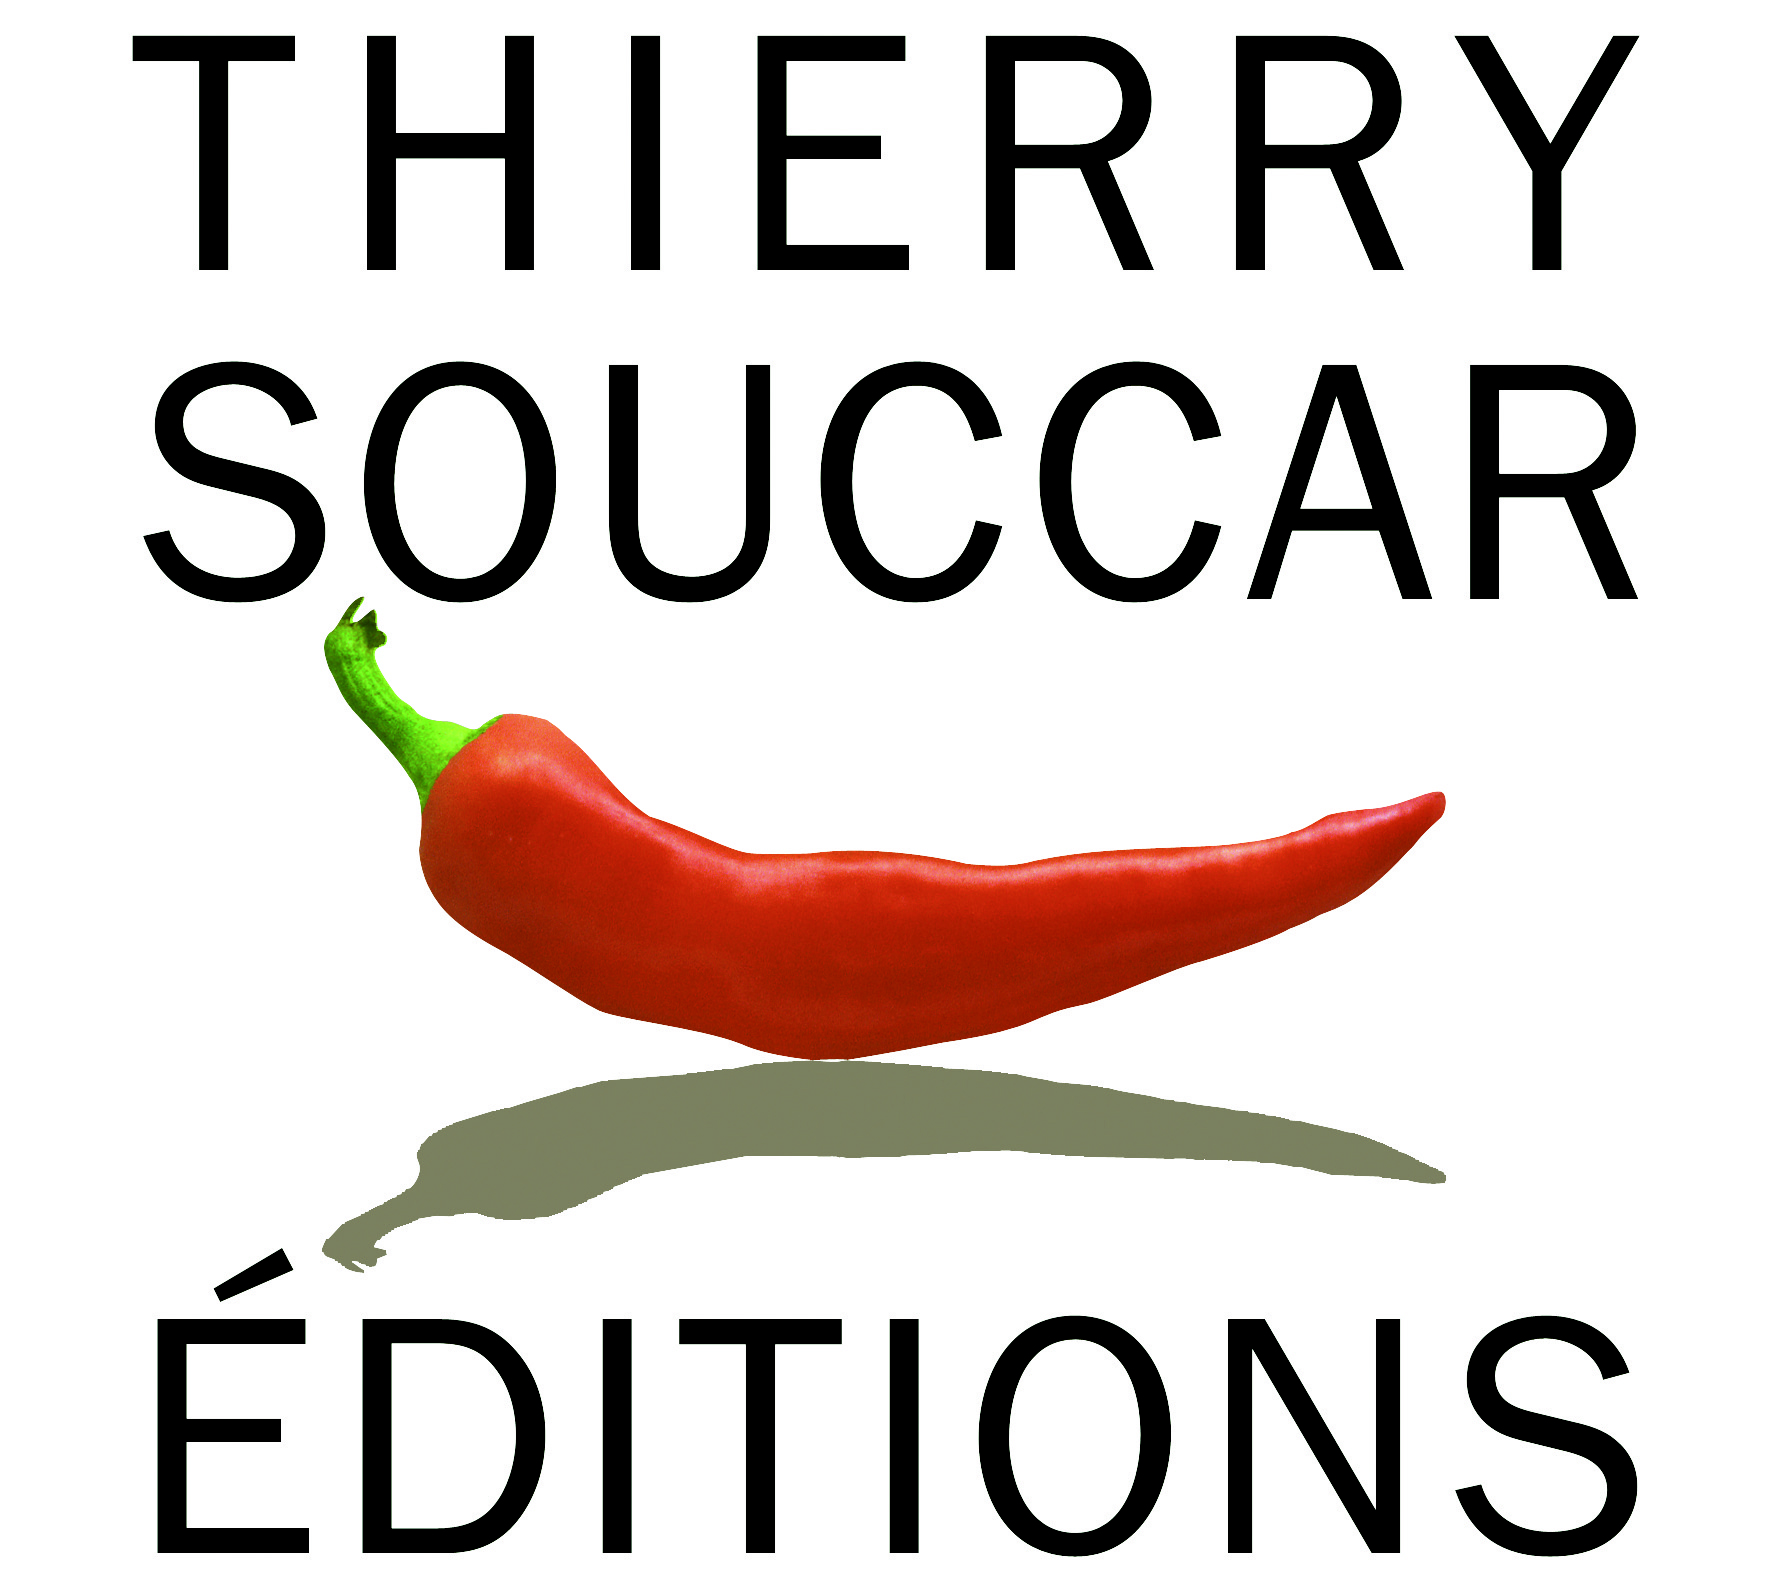 THIERRY SOUCCAR EDITIONS  & lanutrition.fr